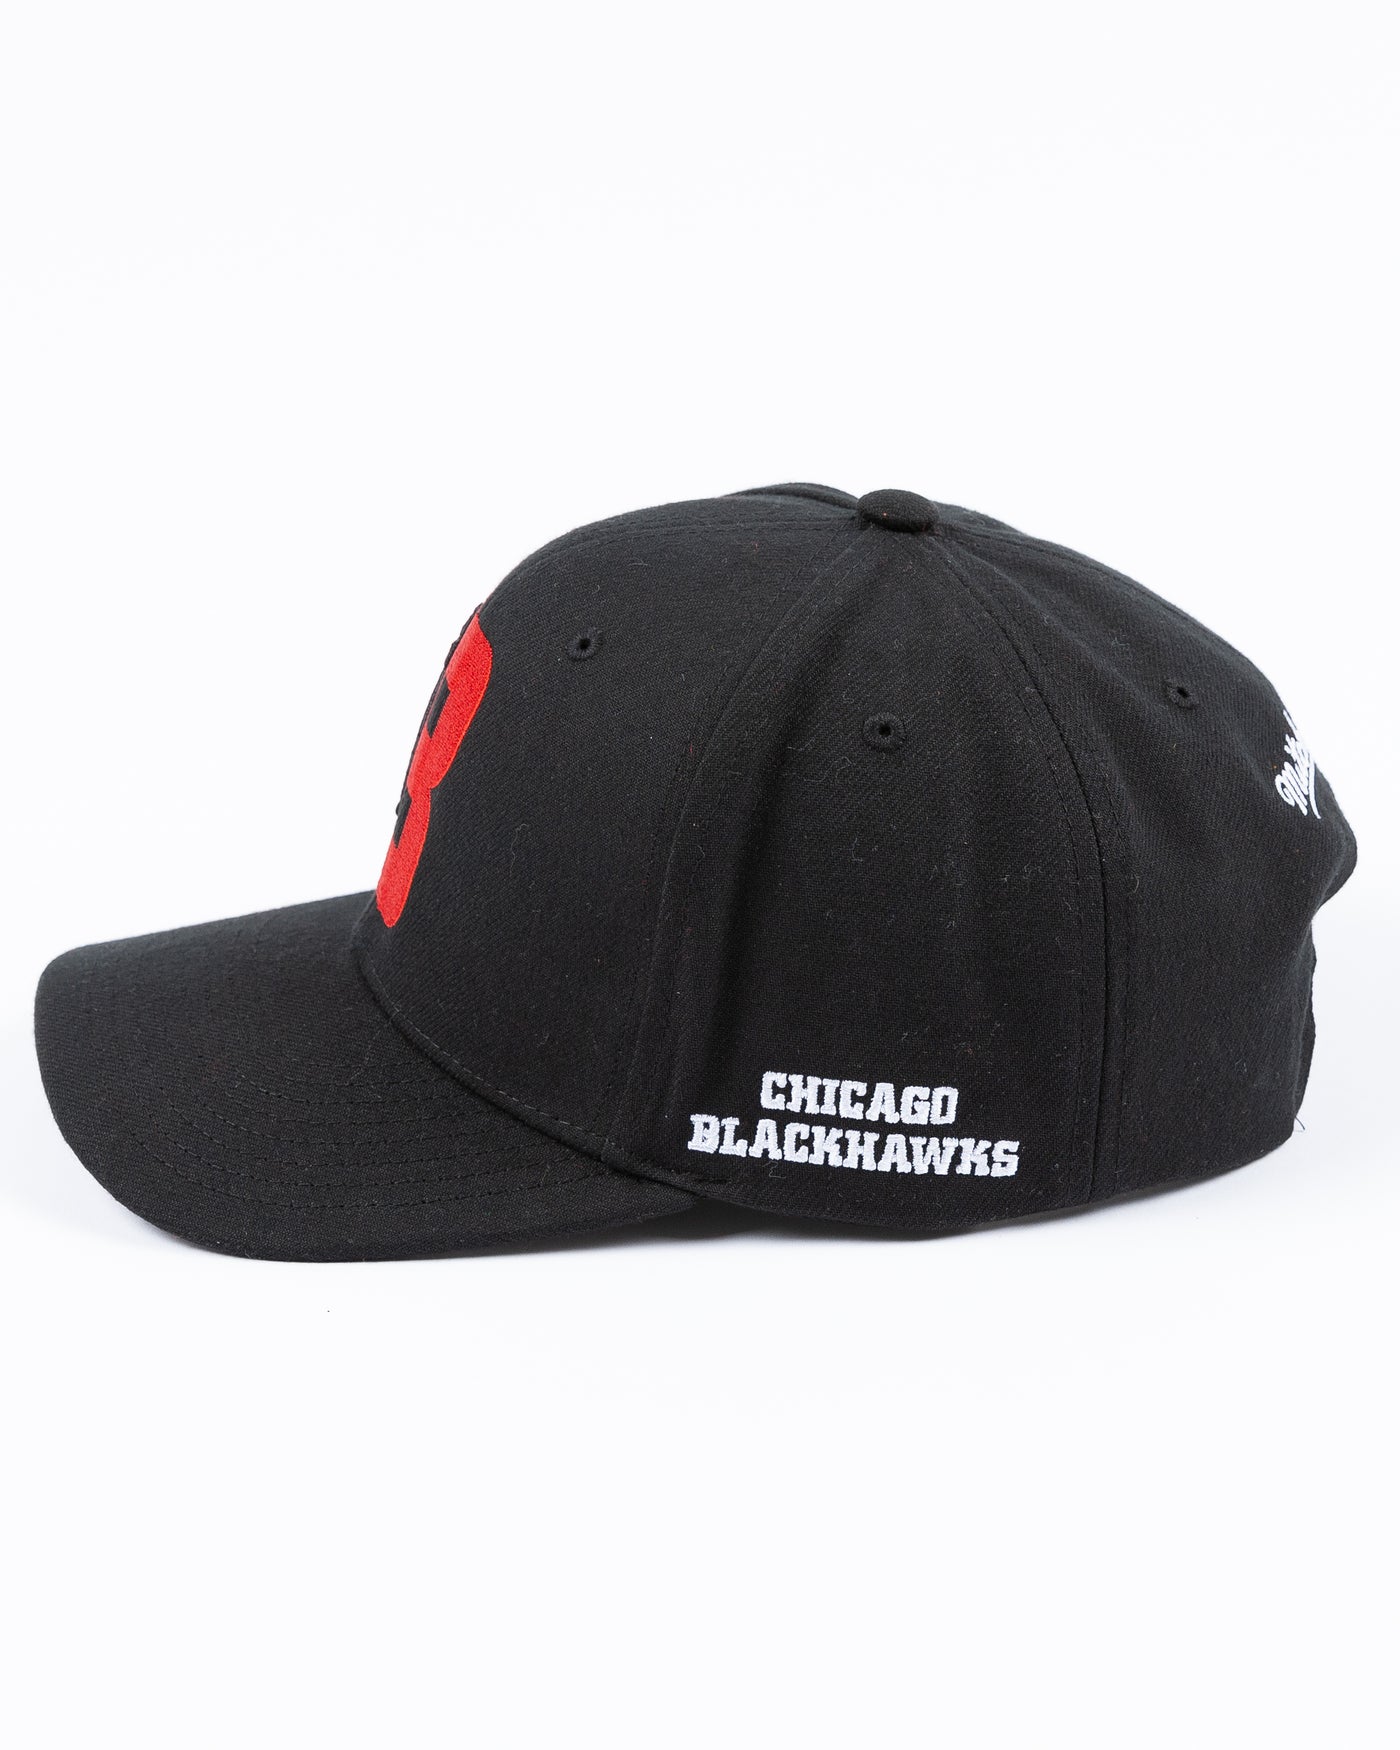 black Mitchell & Ness snapback with Chicago Blackhawks four feathers logo embroidered on red letter B - left side lay flat